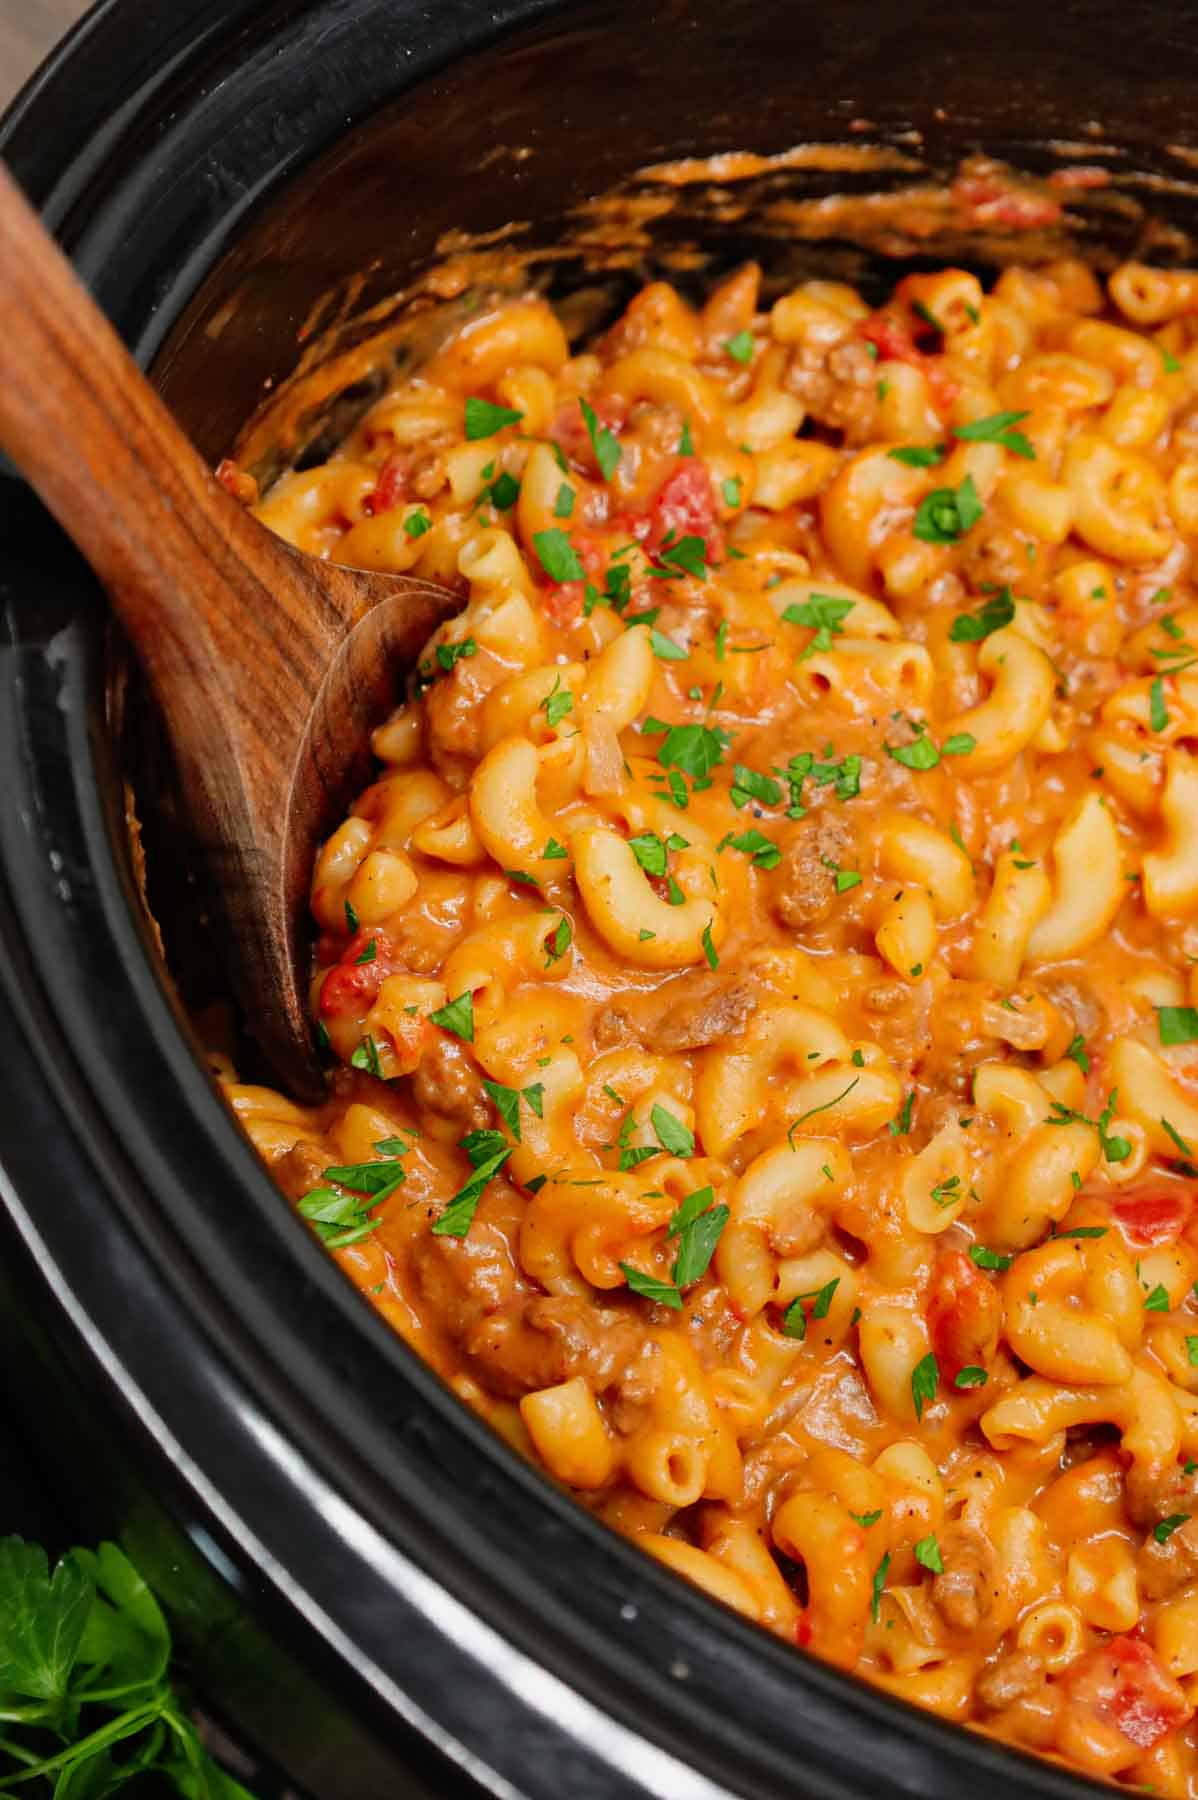 Crock Pot Hamburger Helper is a hearty slow cooker dish loaded with ground beef, diced onions, diced tomatoes, macaroni, cheddar soup and shredded cheddar cheese.